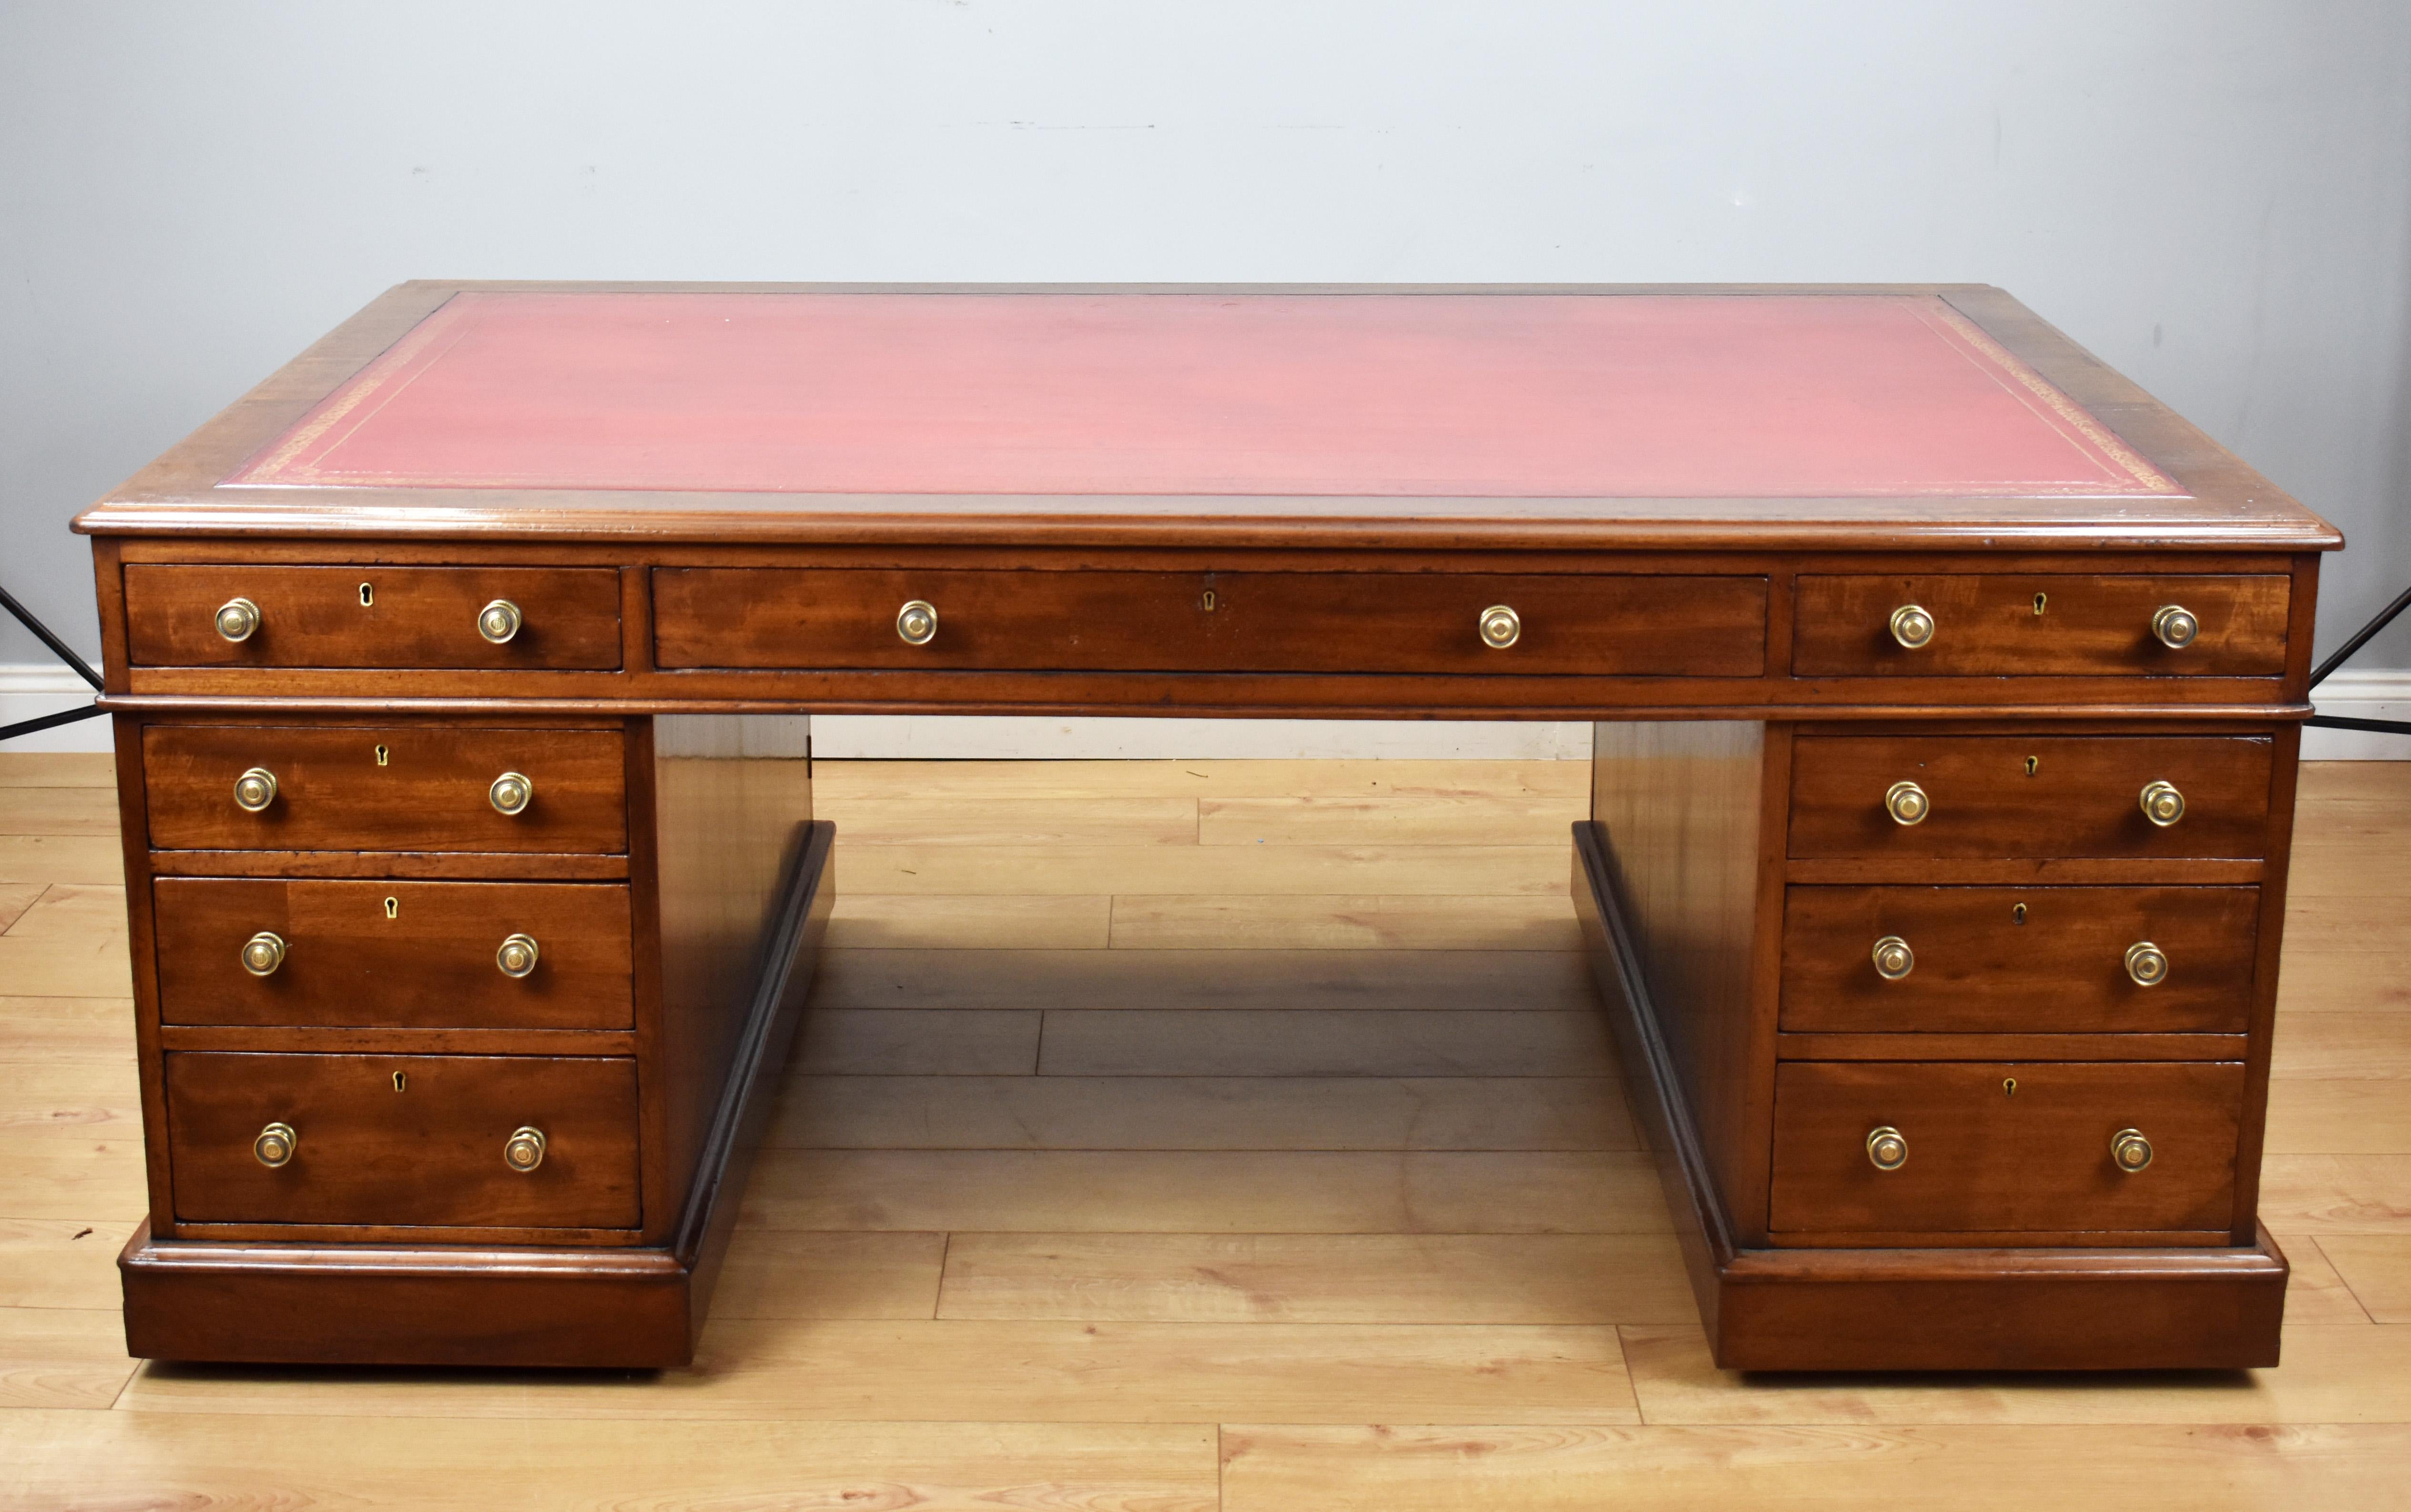 For sale is a good quality Victorian mahogany partners desk by Davis & Co, Tottenham Court Road, London. Of large proportions, the desk has a read leather hide writing surface, decorated with gold tooling, above three drawers in the top the front,